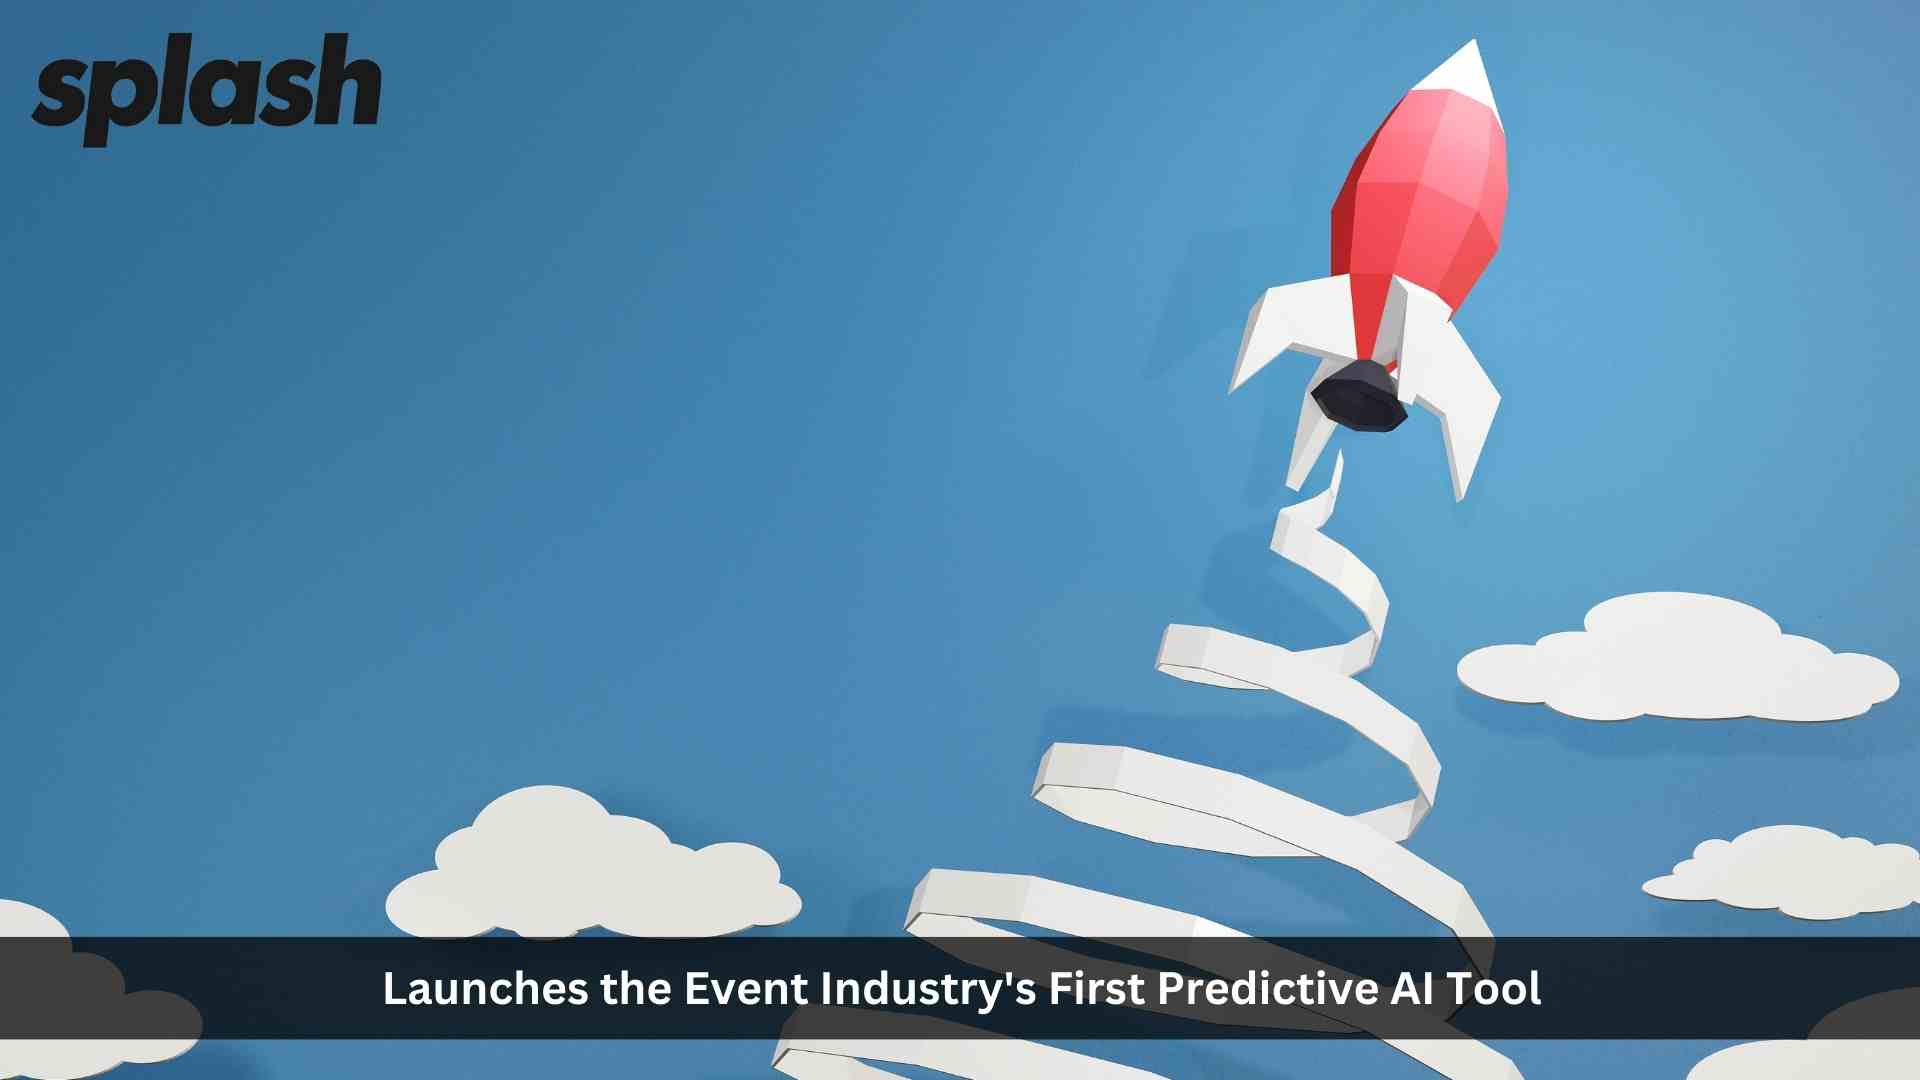 Splash Launches the Event Industry's First Predictive AI Tool